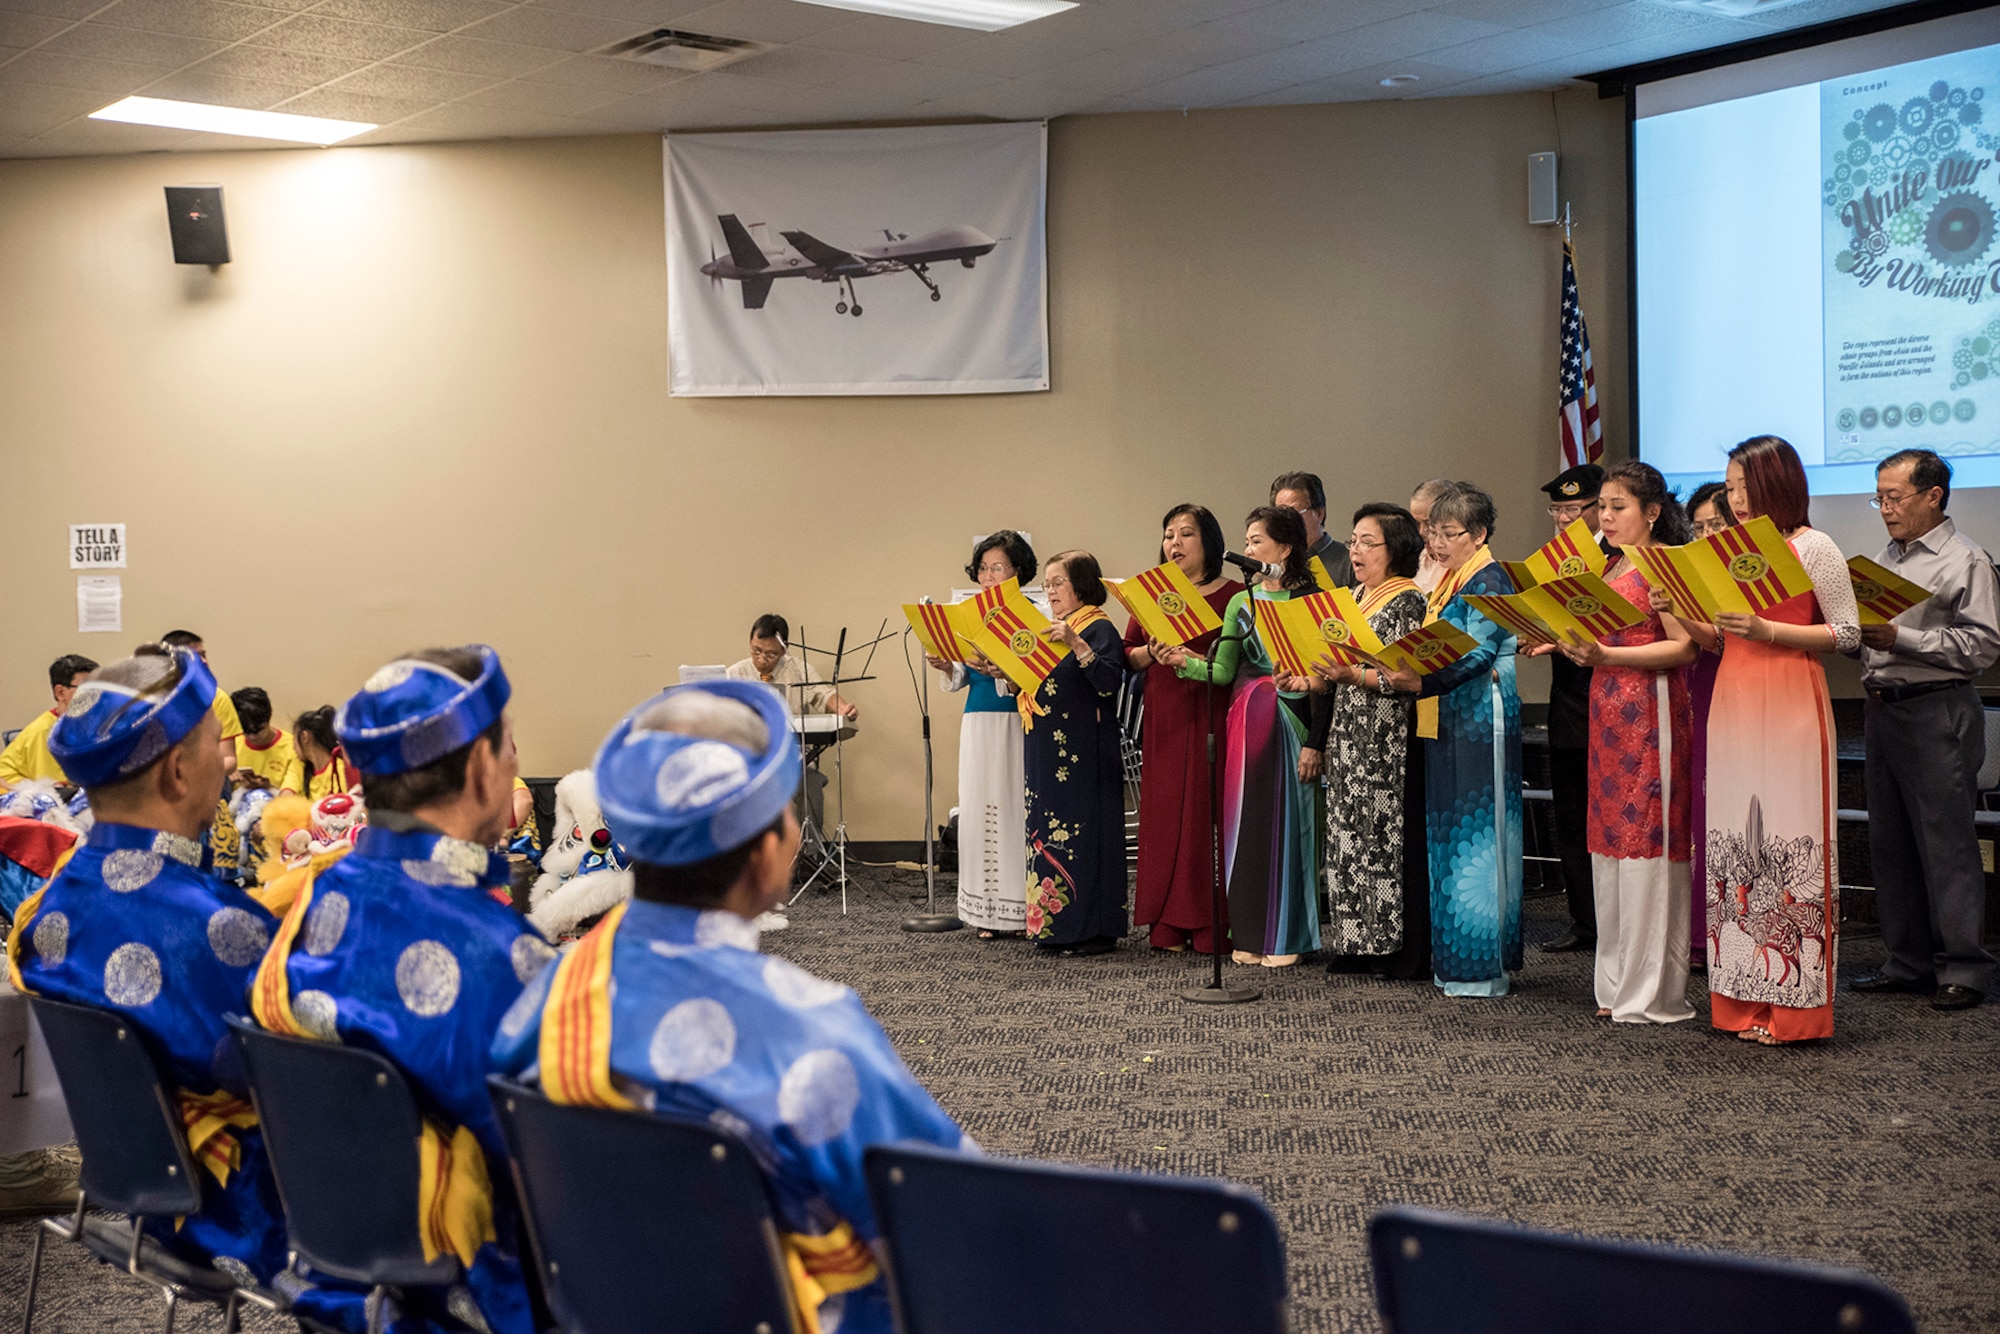 Members of the Fort Smith Vietnamese Community Center sing during the 188th Wing’s Asian American and Pacific Islander Heritage Month observance at Ebbing Air National Guard Base, Fort Smith, Ark., May 6, 2018. The event was part of the 188th Wing’s annual family day, an event designed to build morale and camaraderie for wing members and families. (U.S. Air National Guard photo by Senior Airman Matthew Matlock)